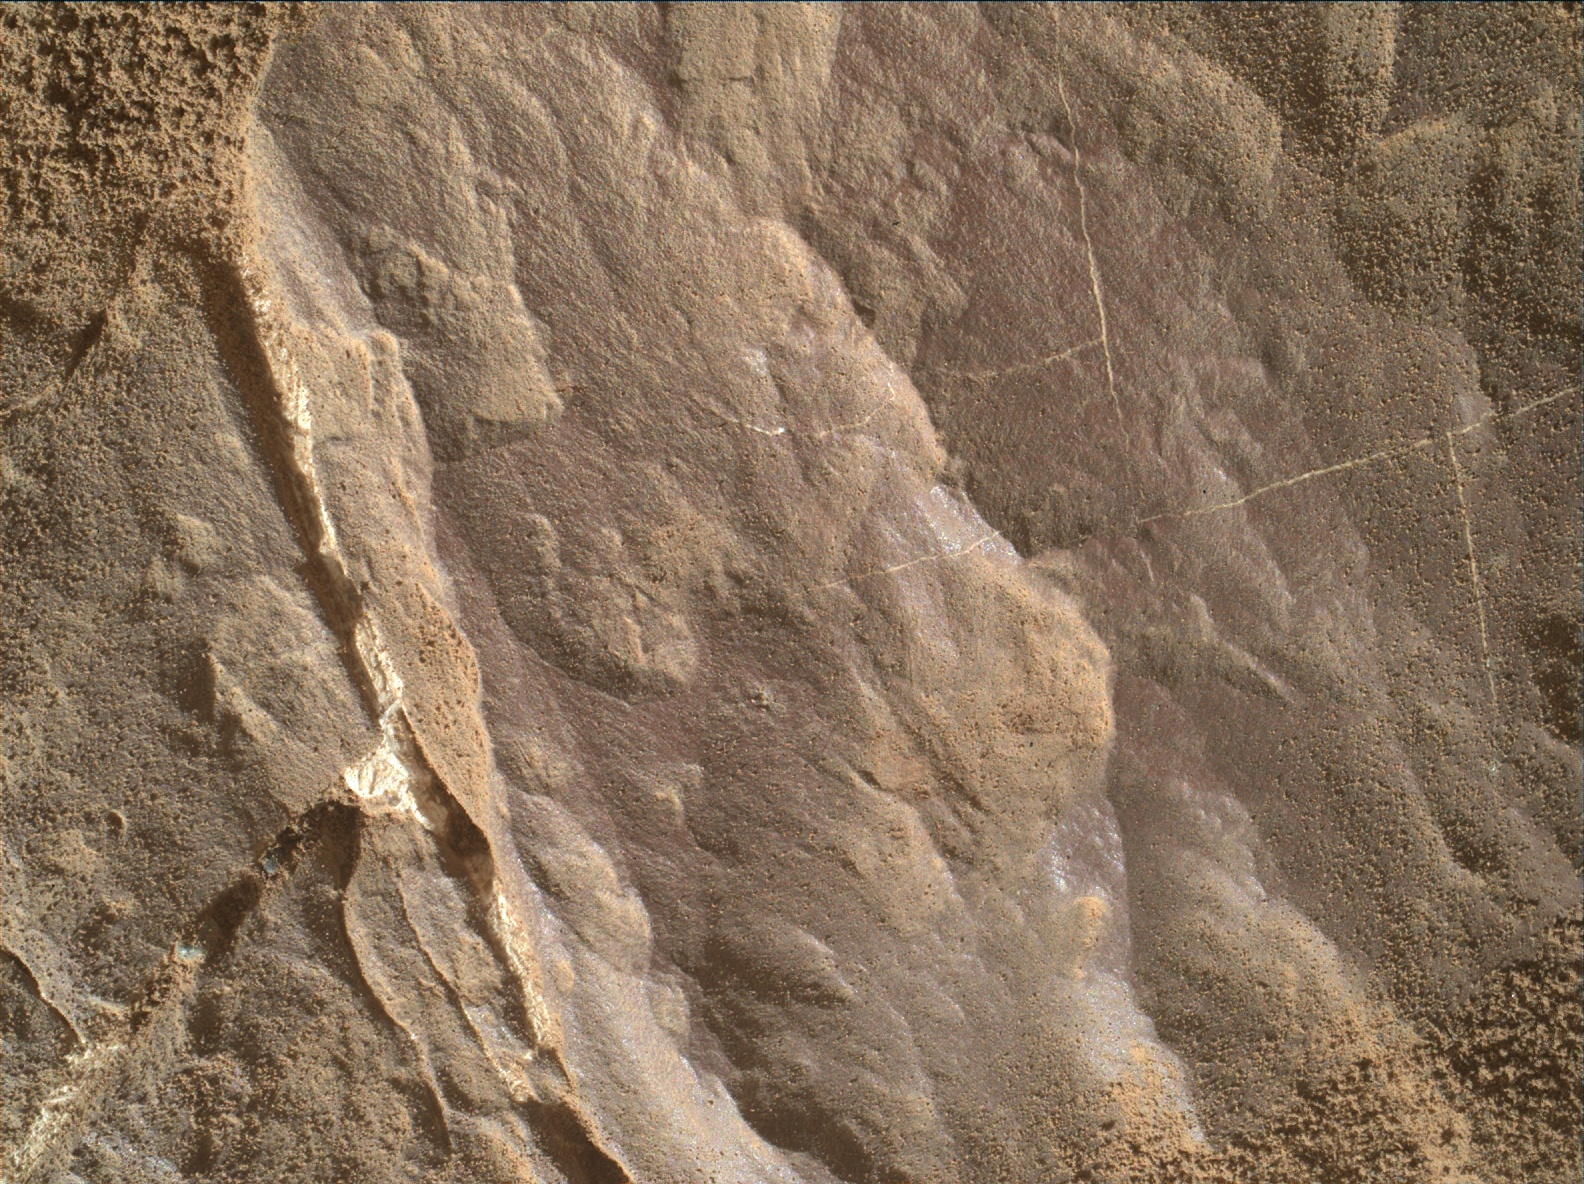 Nasa's Mars rover Curiosity acquired this image using its Mars Hand Lens Imager (MAHLI) on Sol 1837